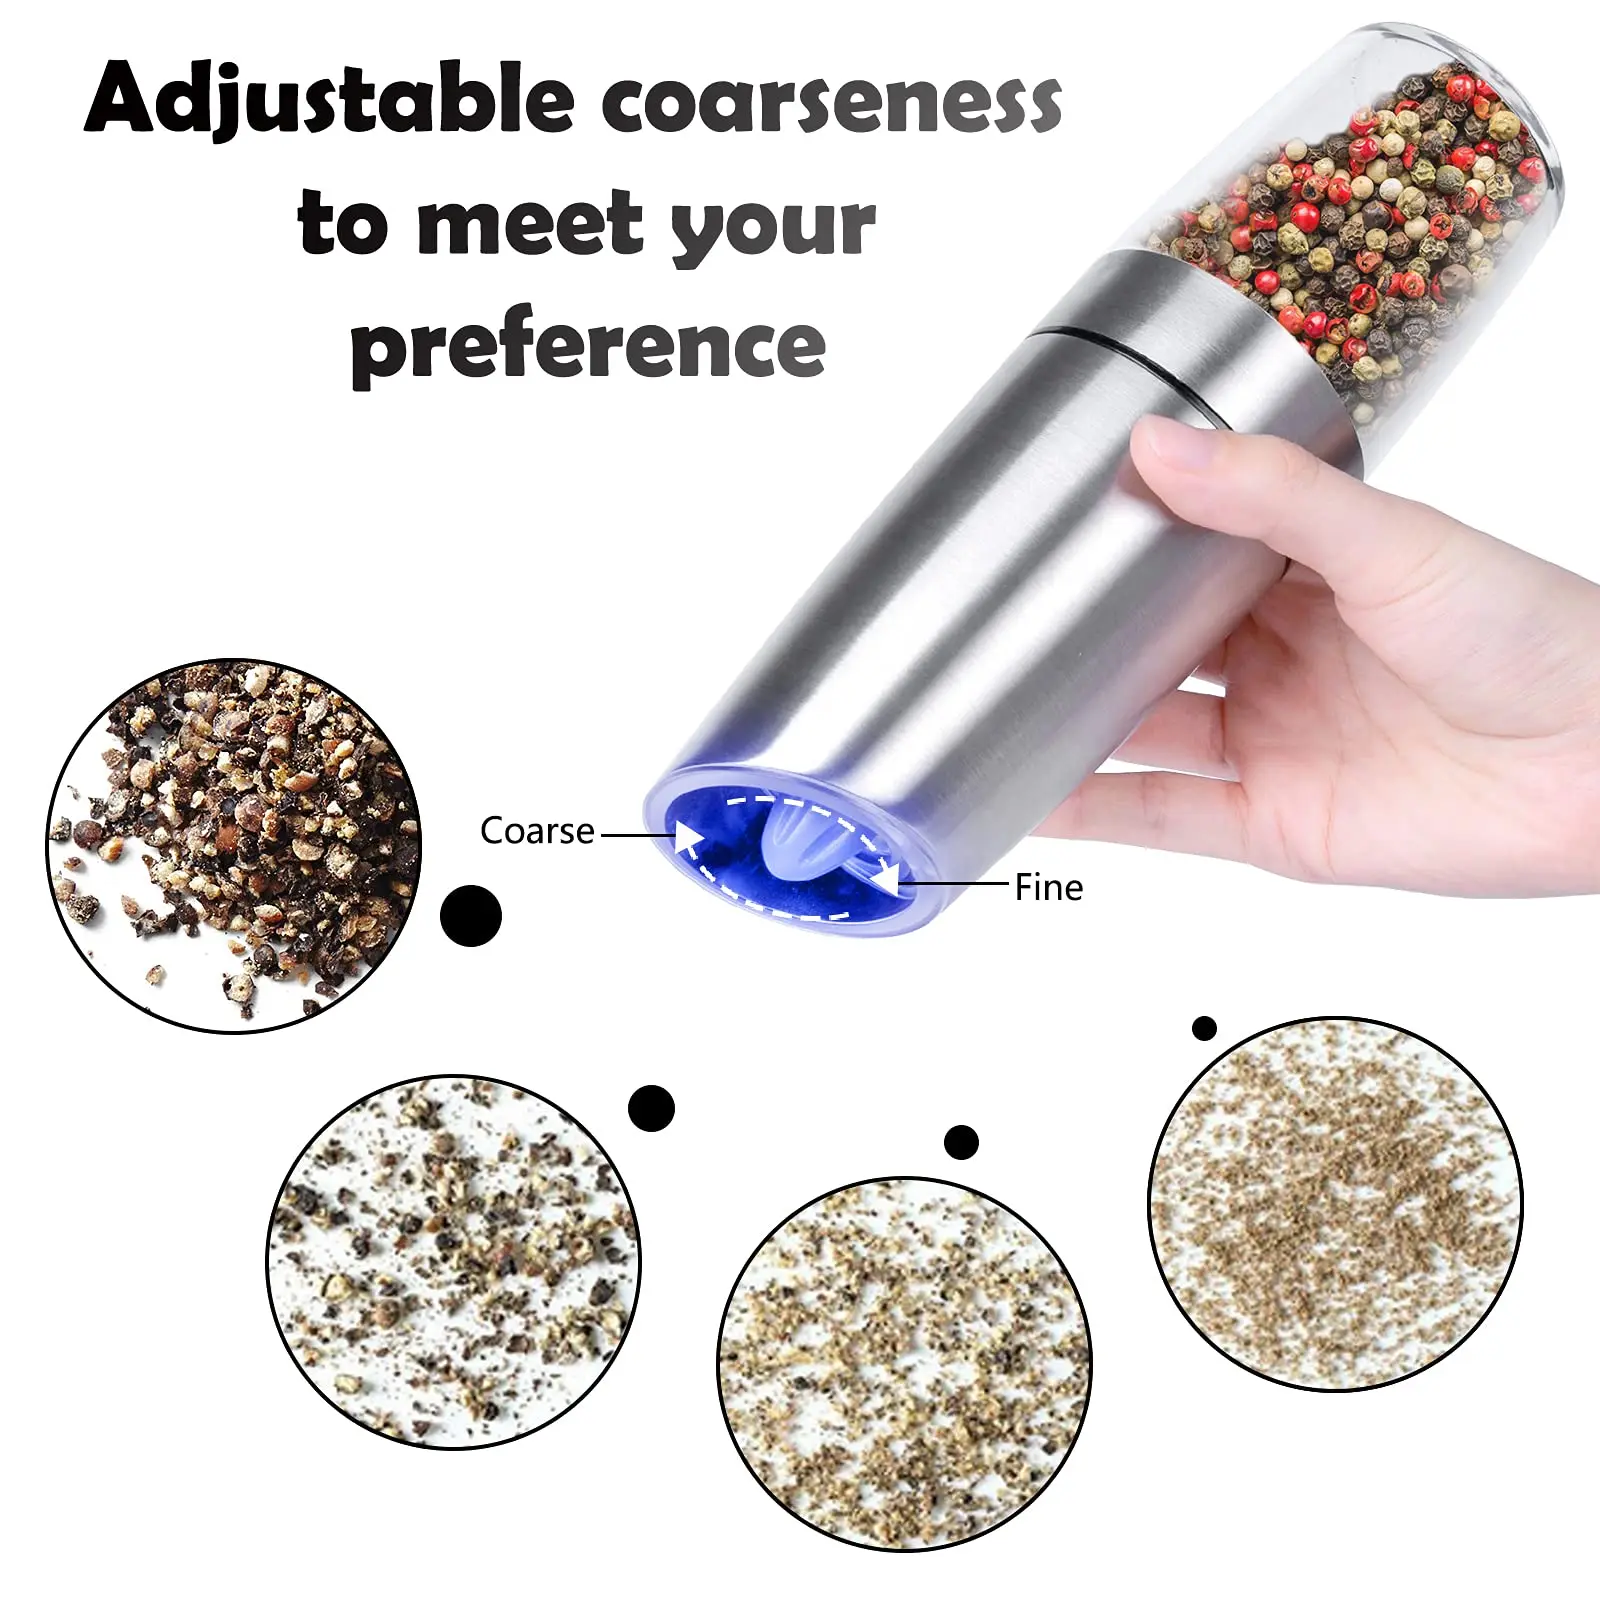 https://ae01.alicdn.com/kf/Aa15db841b1a742b494abf51f470ef8ebx/Auto-Electric-Salt-and-Pepper-Mill-Grinder-Set-Gravity-Sensor-One-Hand-Operation-Battery-Operated-with.jpg